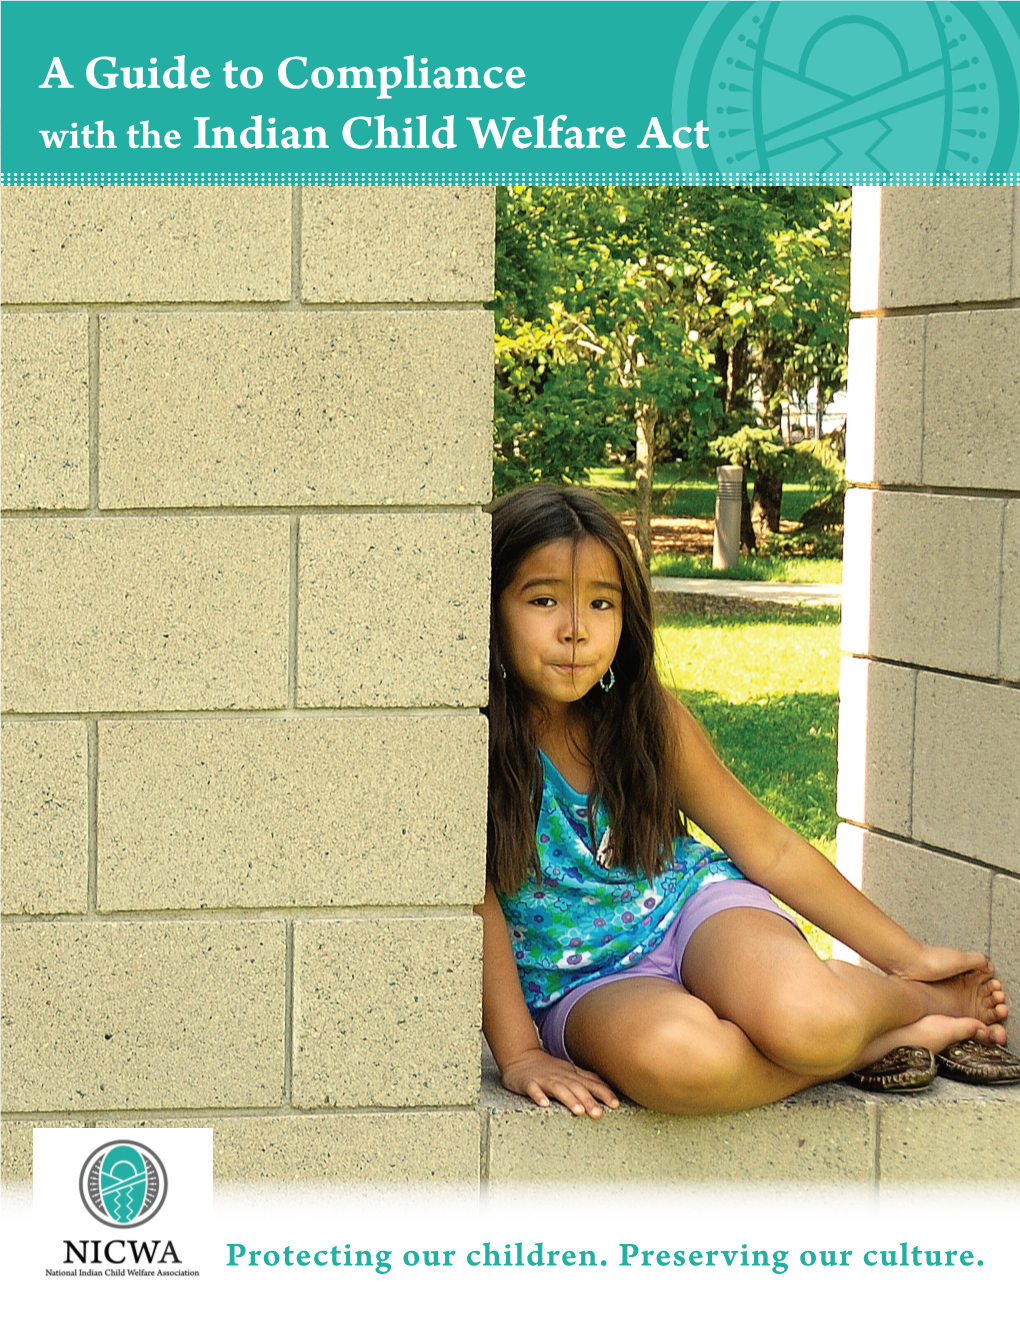 A Guide to Compliance with the Indian Child Welfare Act